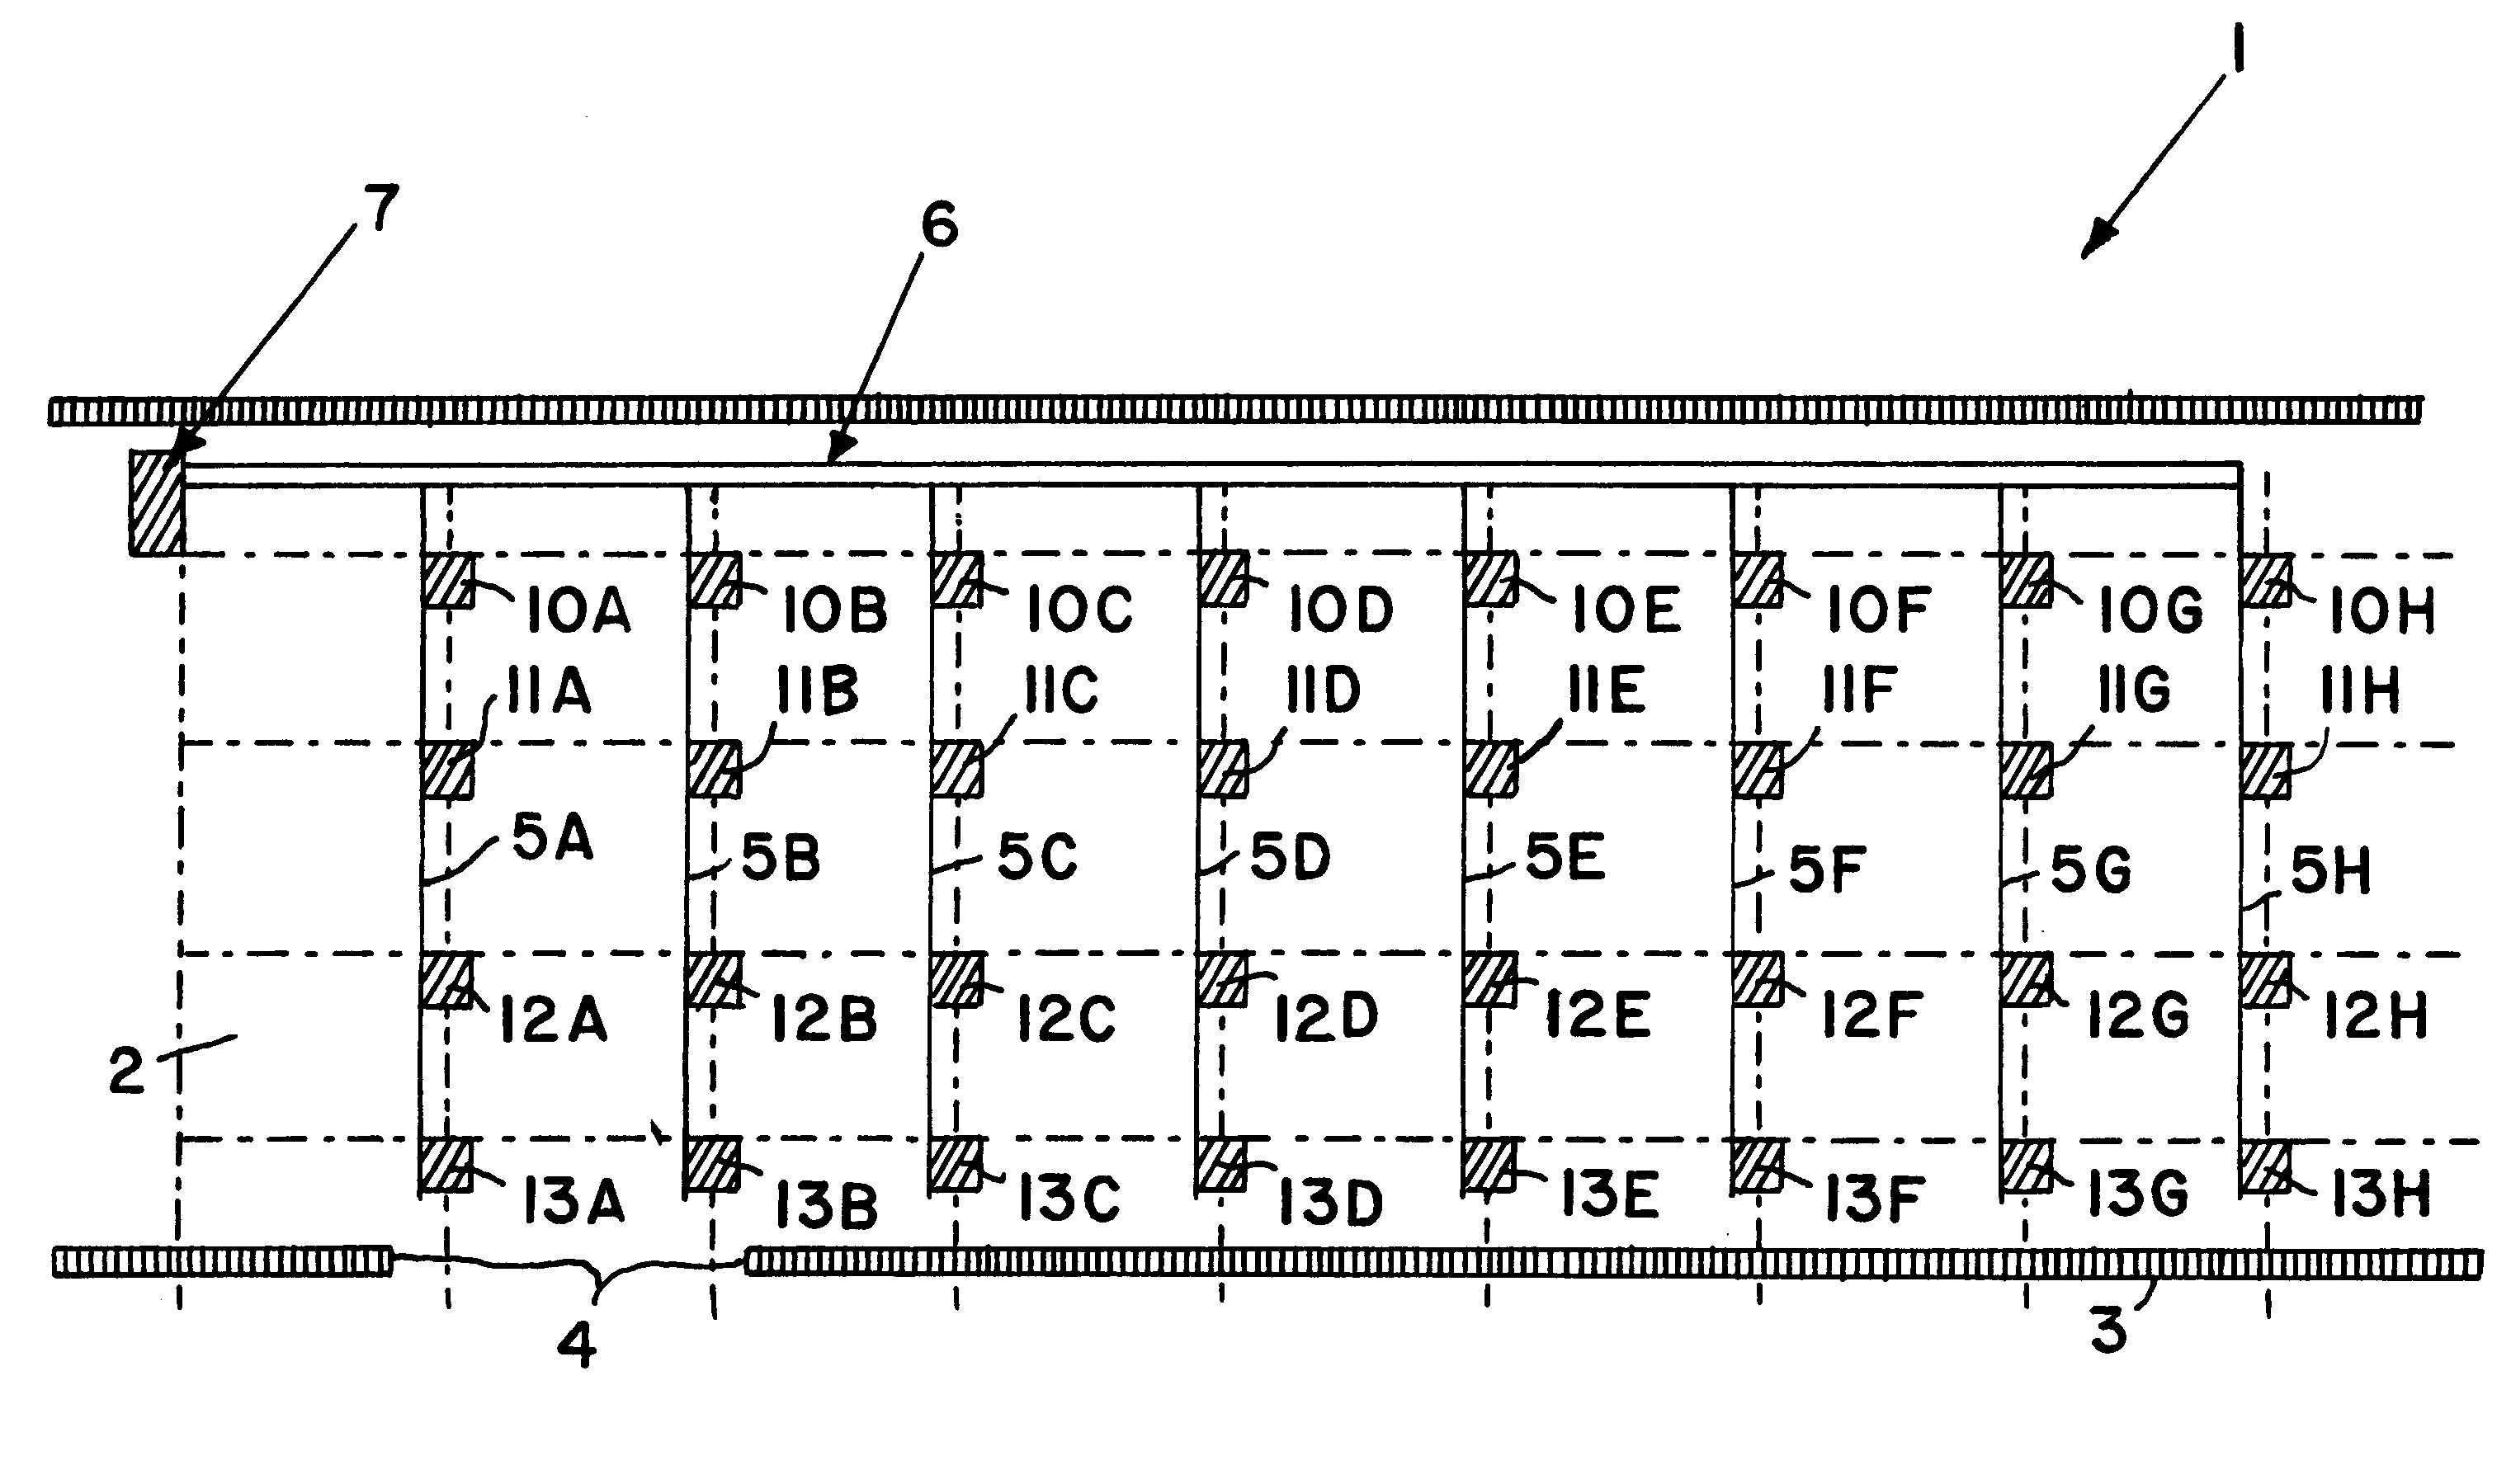 Pneumatically actuated freight loading system for an aircraft